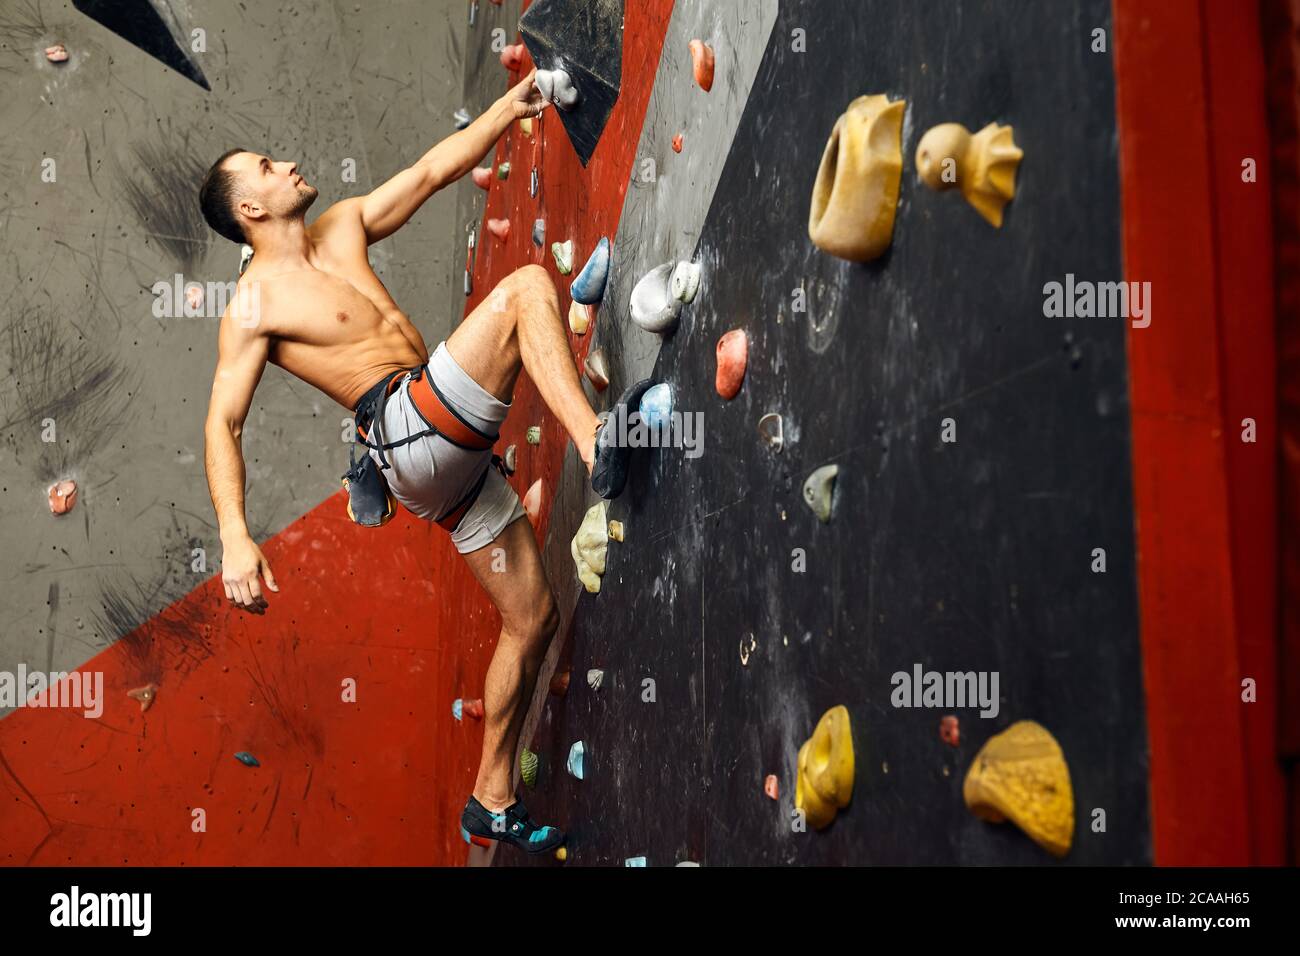 Unrecognizable athlete climber man exercising on grey practical wall with footholds, indoor shot, close up bouldering, rear view. Stock Photo